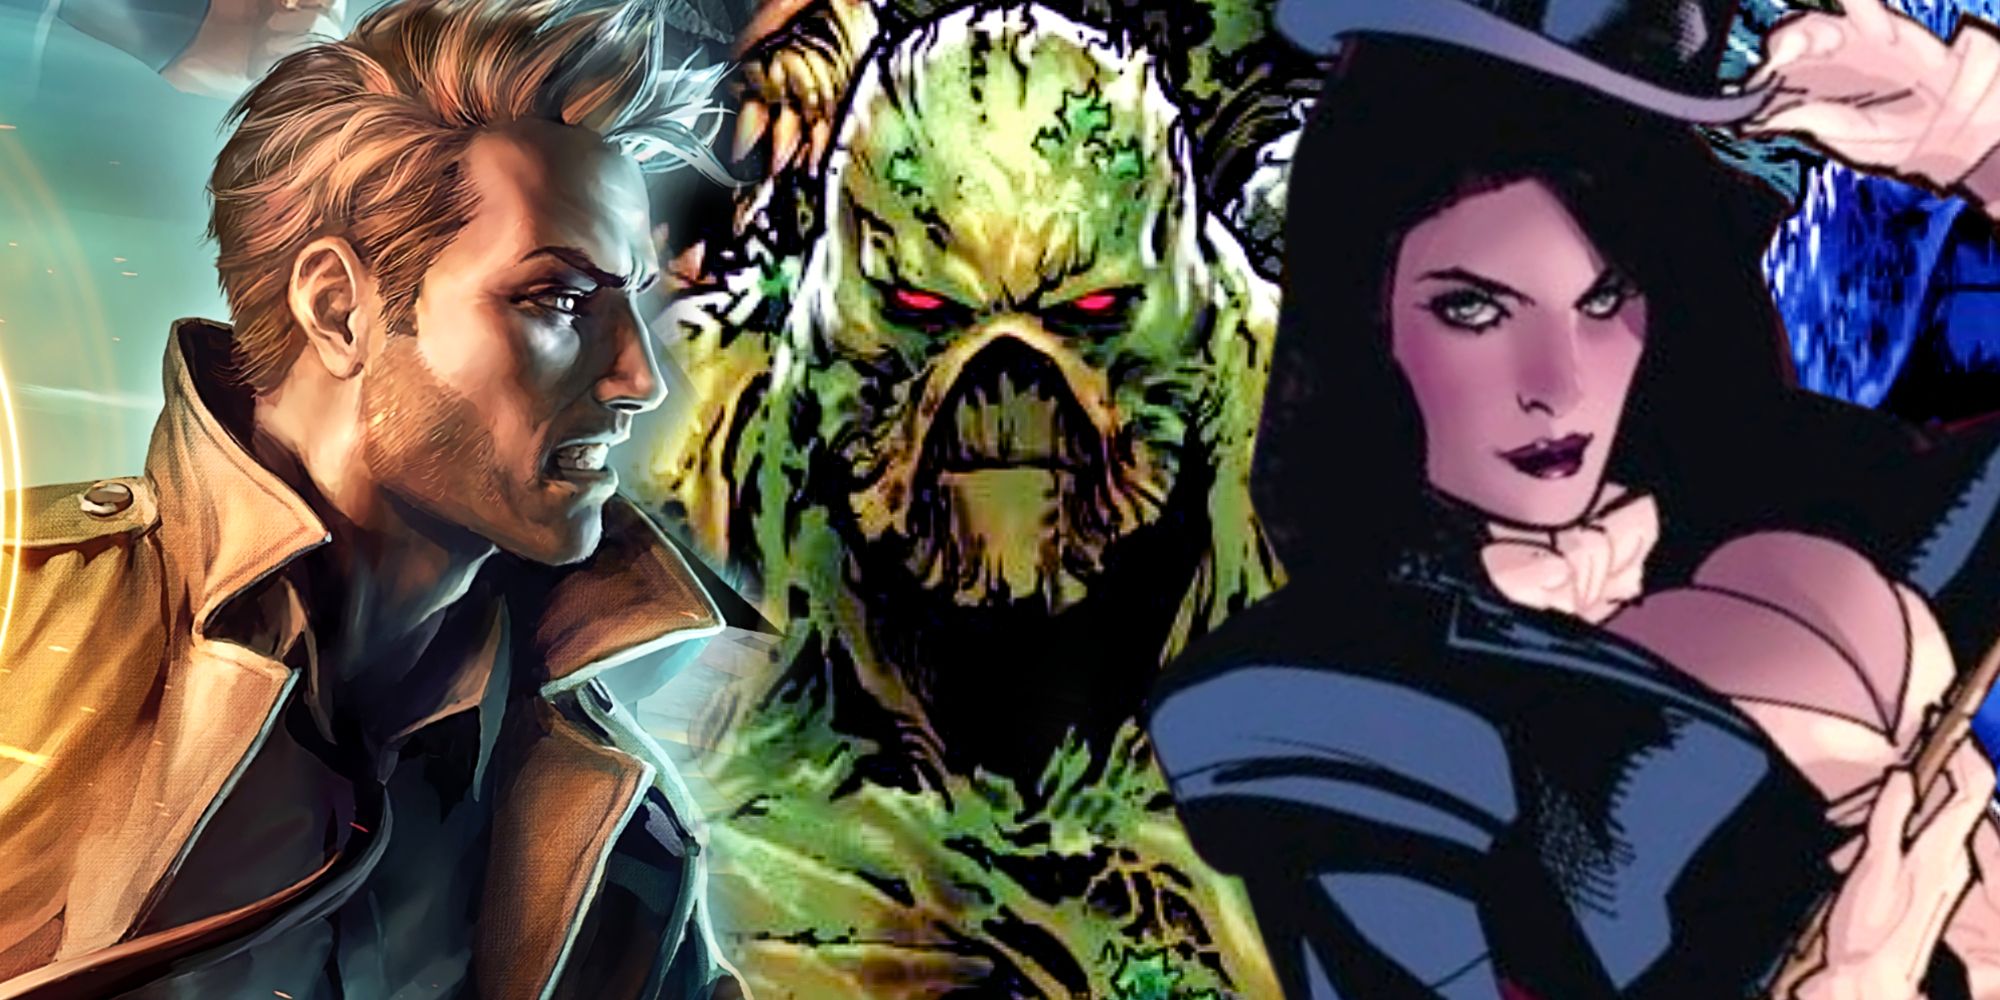 Justice League Dark Members Swamp Thing, Constantine, and Zatanna